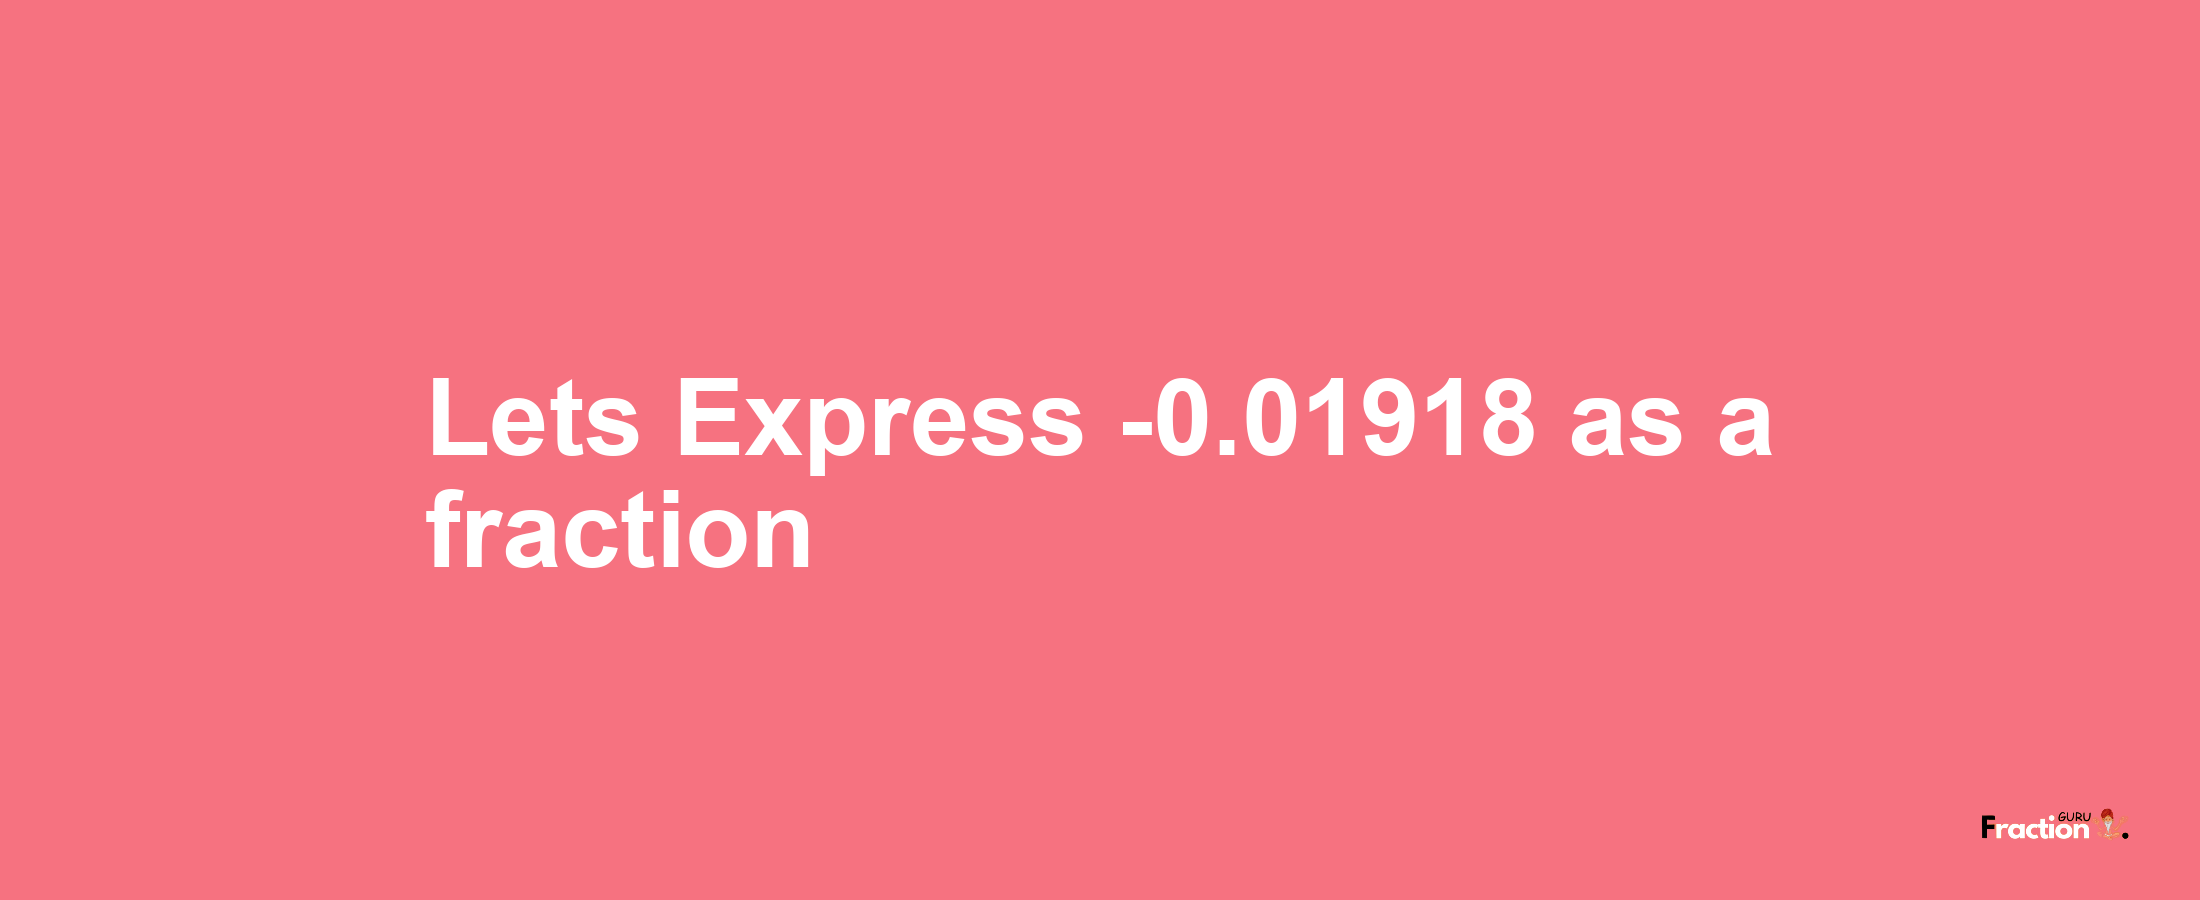 Lets Express -0.01918 as afraction